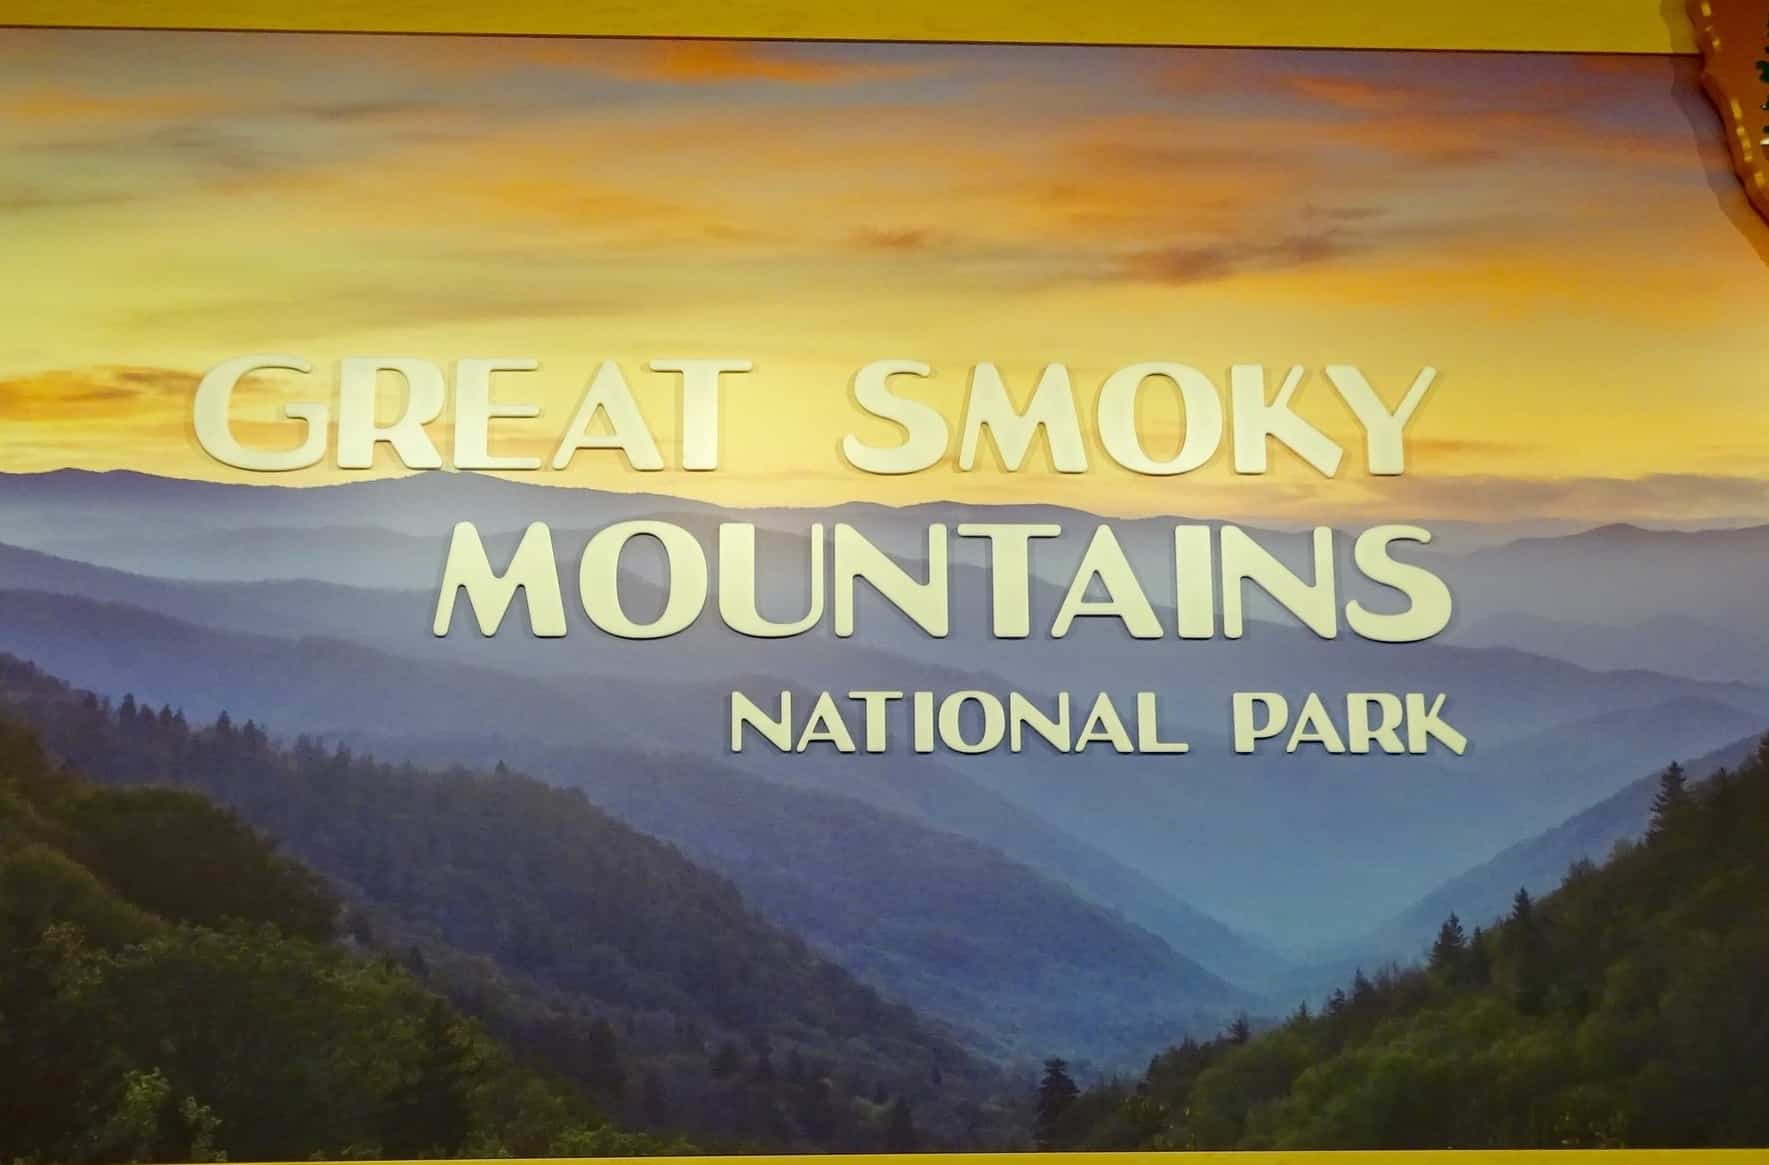 Five Things to Do in the Great Smoky Mountains National Park Besides Hiking